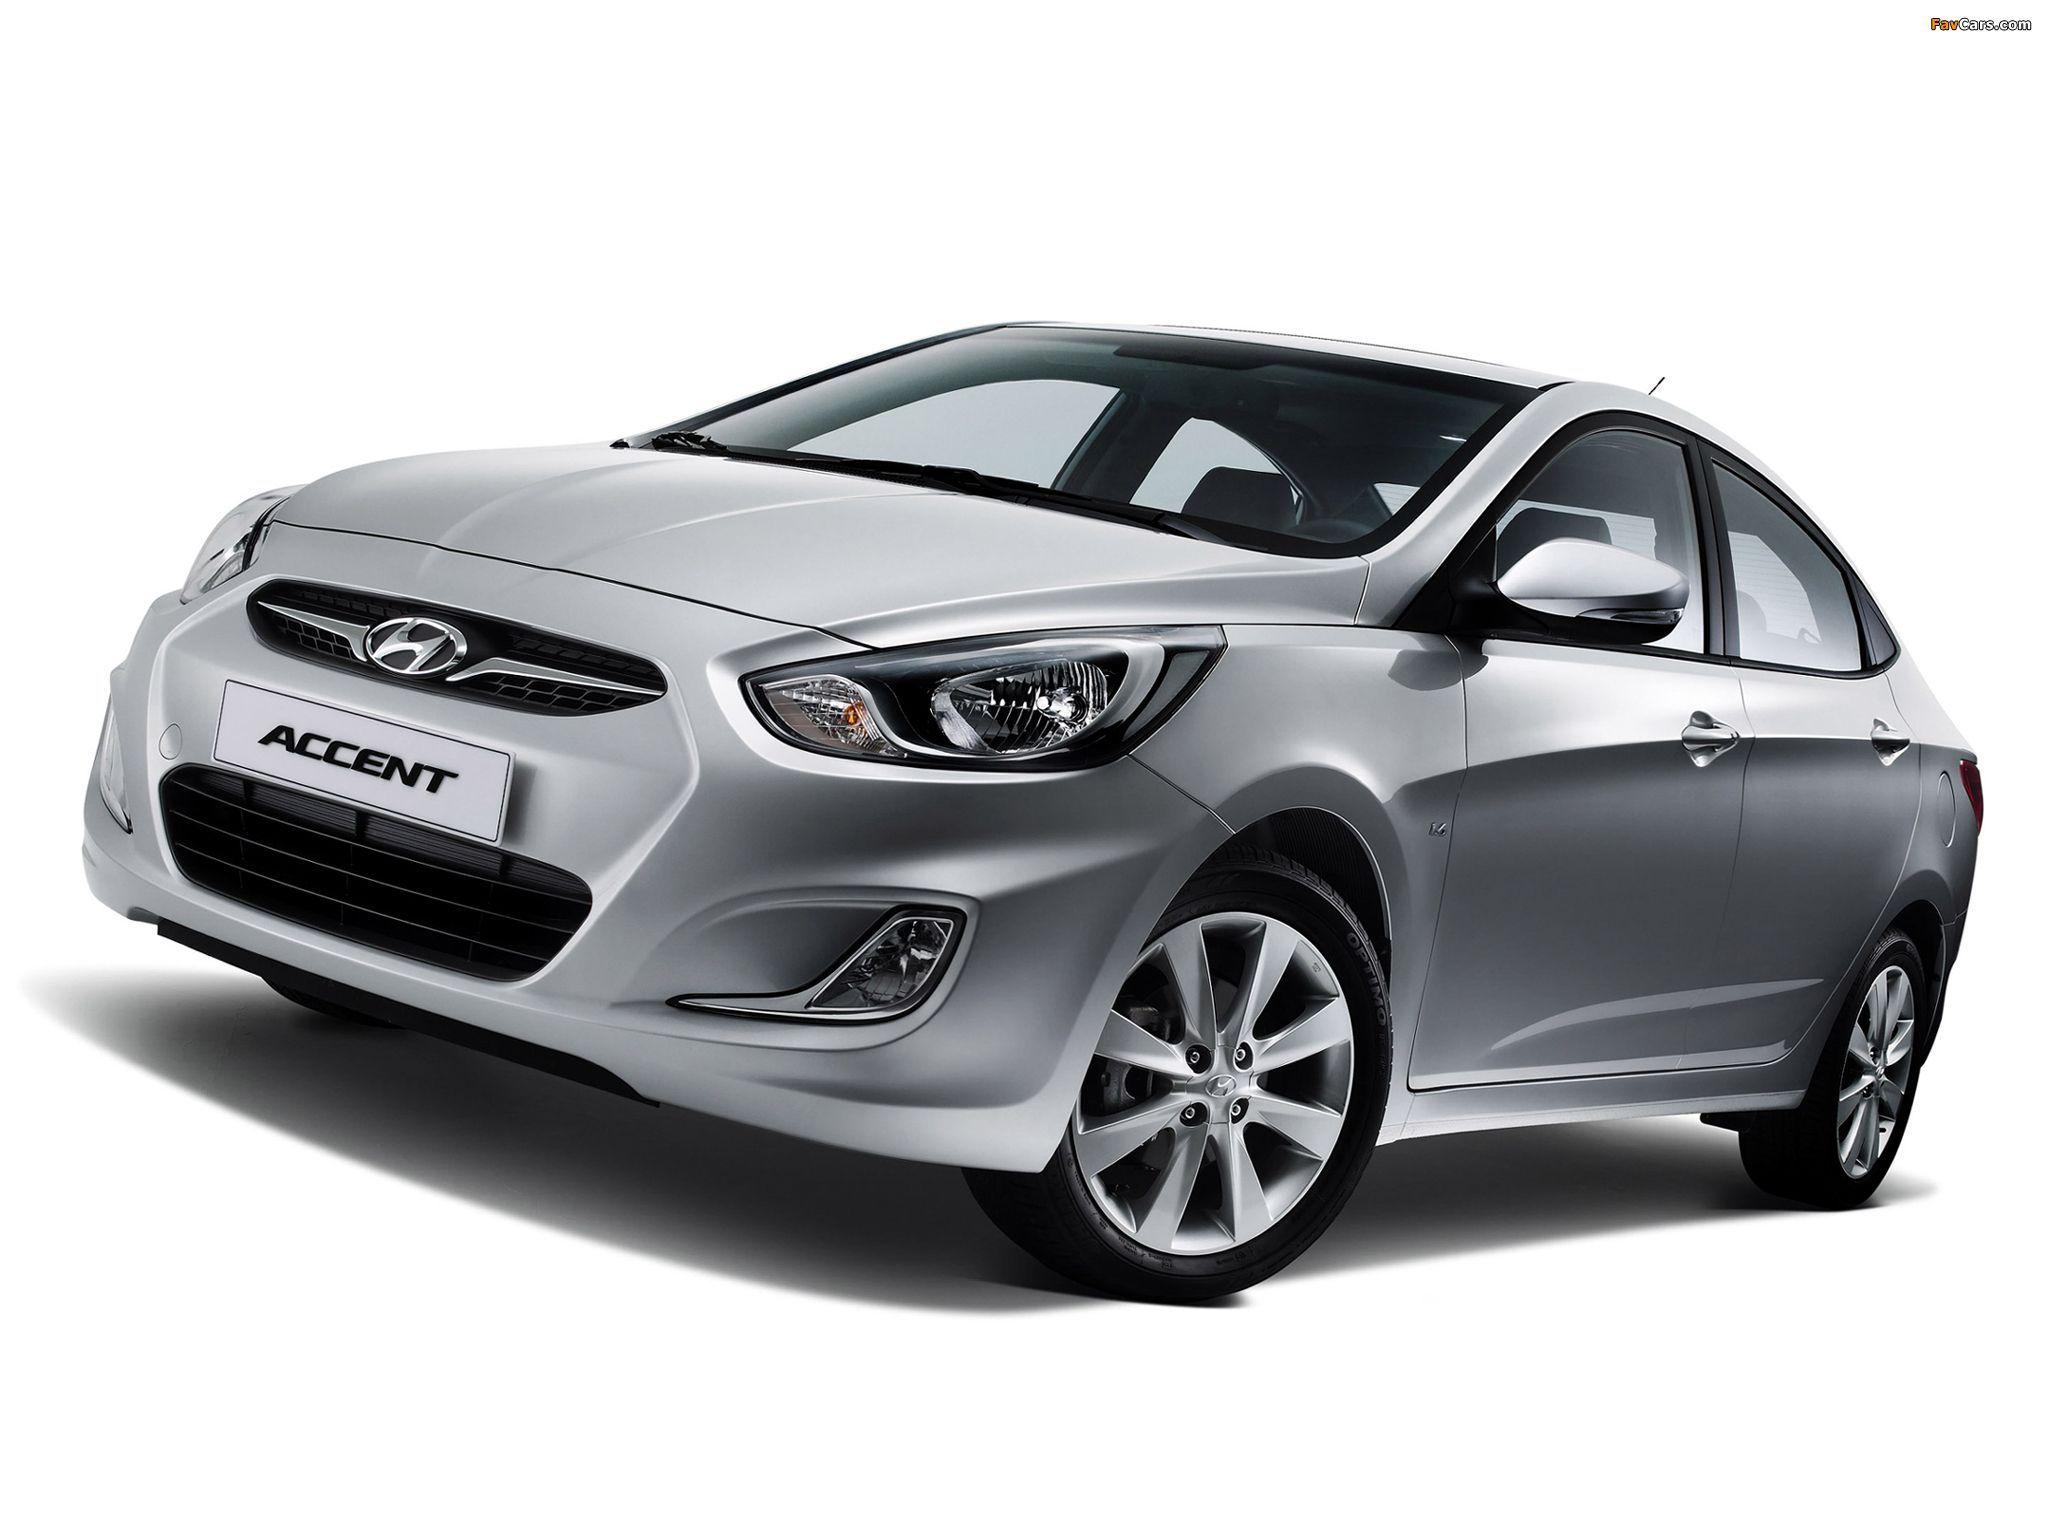 Hyundai Accent Wallpapers - Top Free Hyundai Accent Backgrounds -  WallpaperAccess